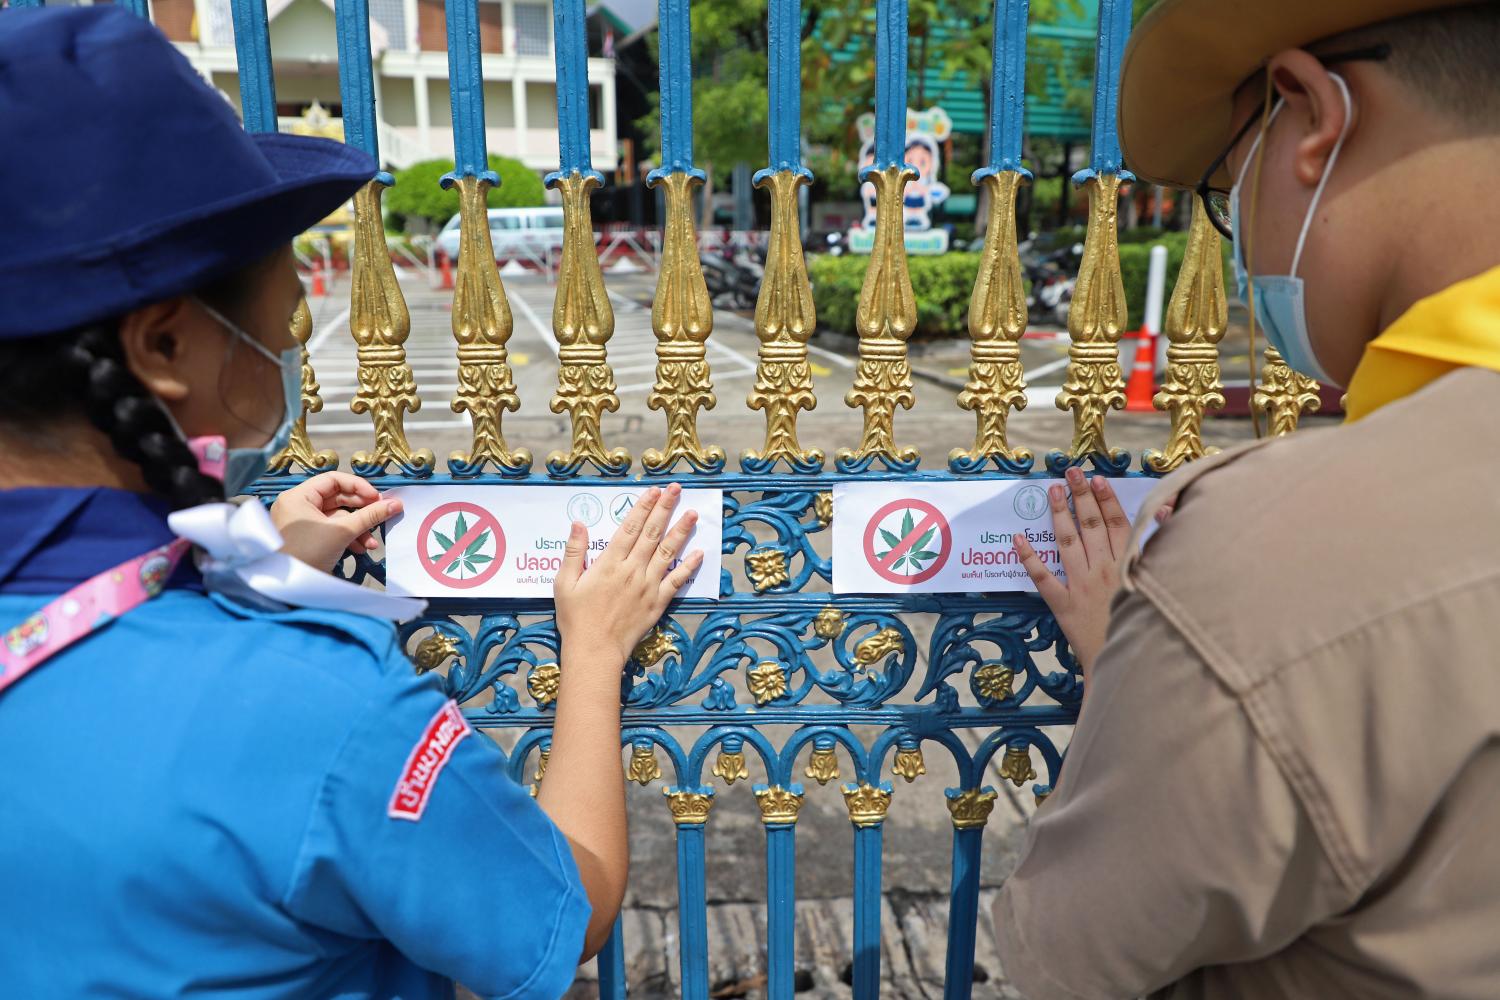 Thailand Issues 10 Step Guide on Cannabis to Tourists